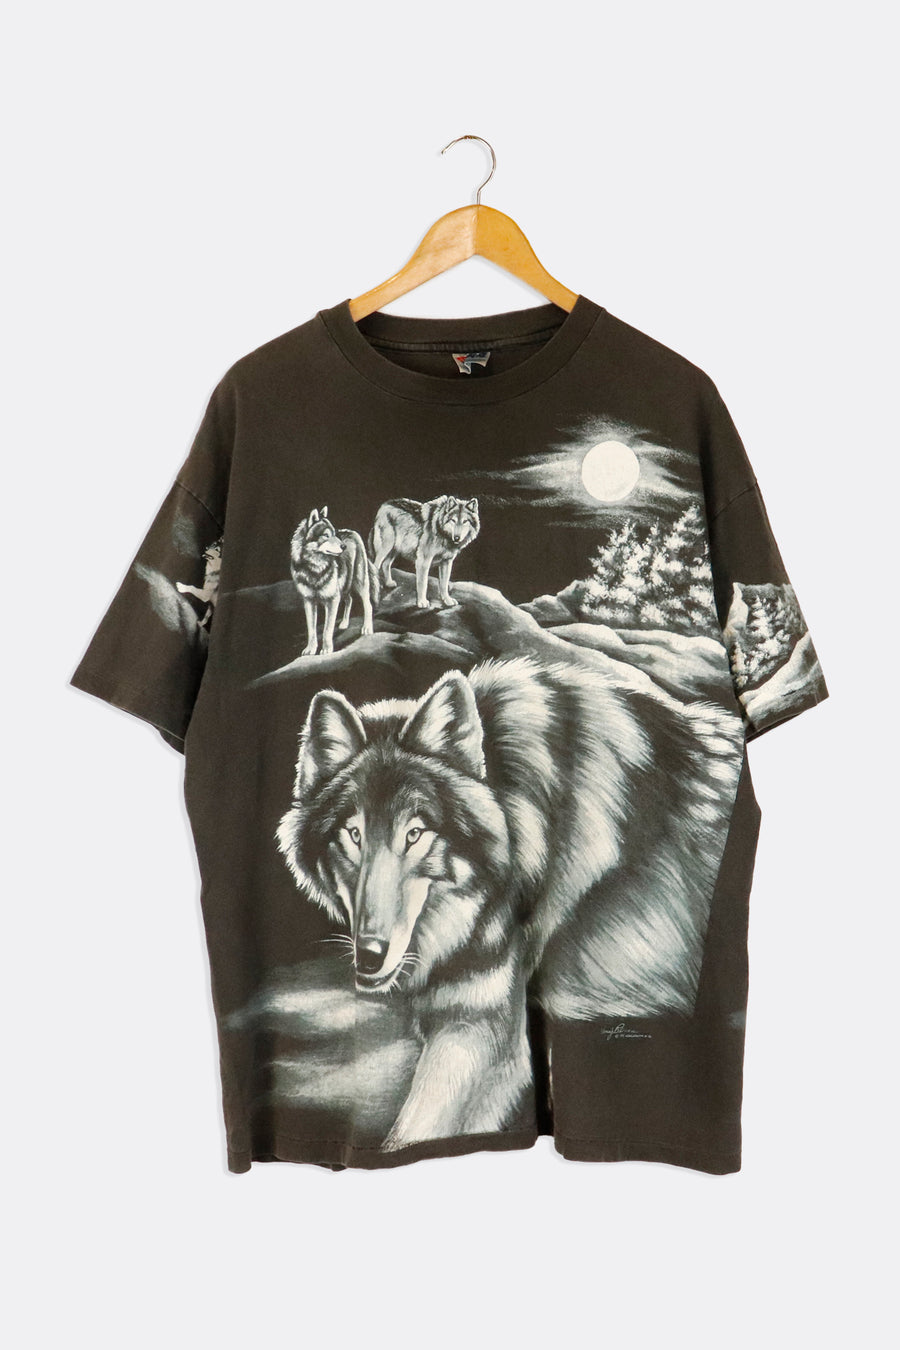 Vintage 1994 Best Wolf T-shirt of all Time Sz XL